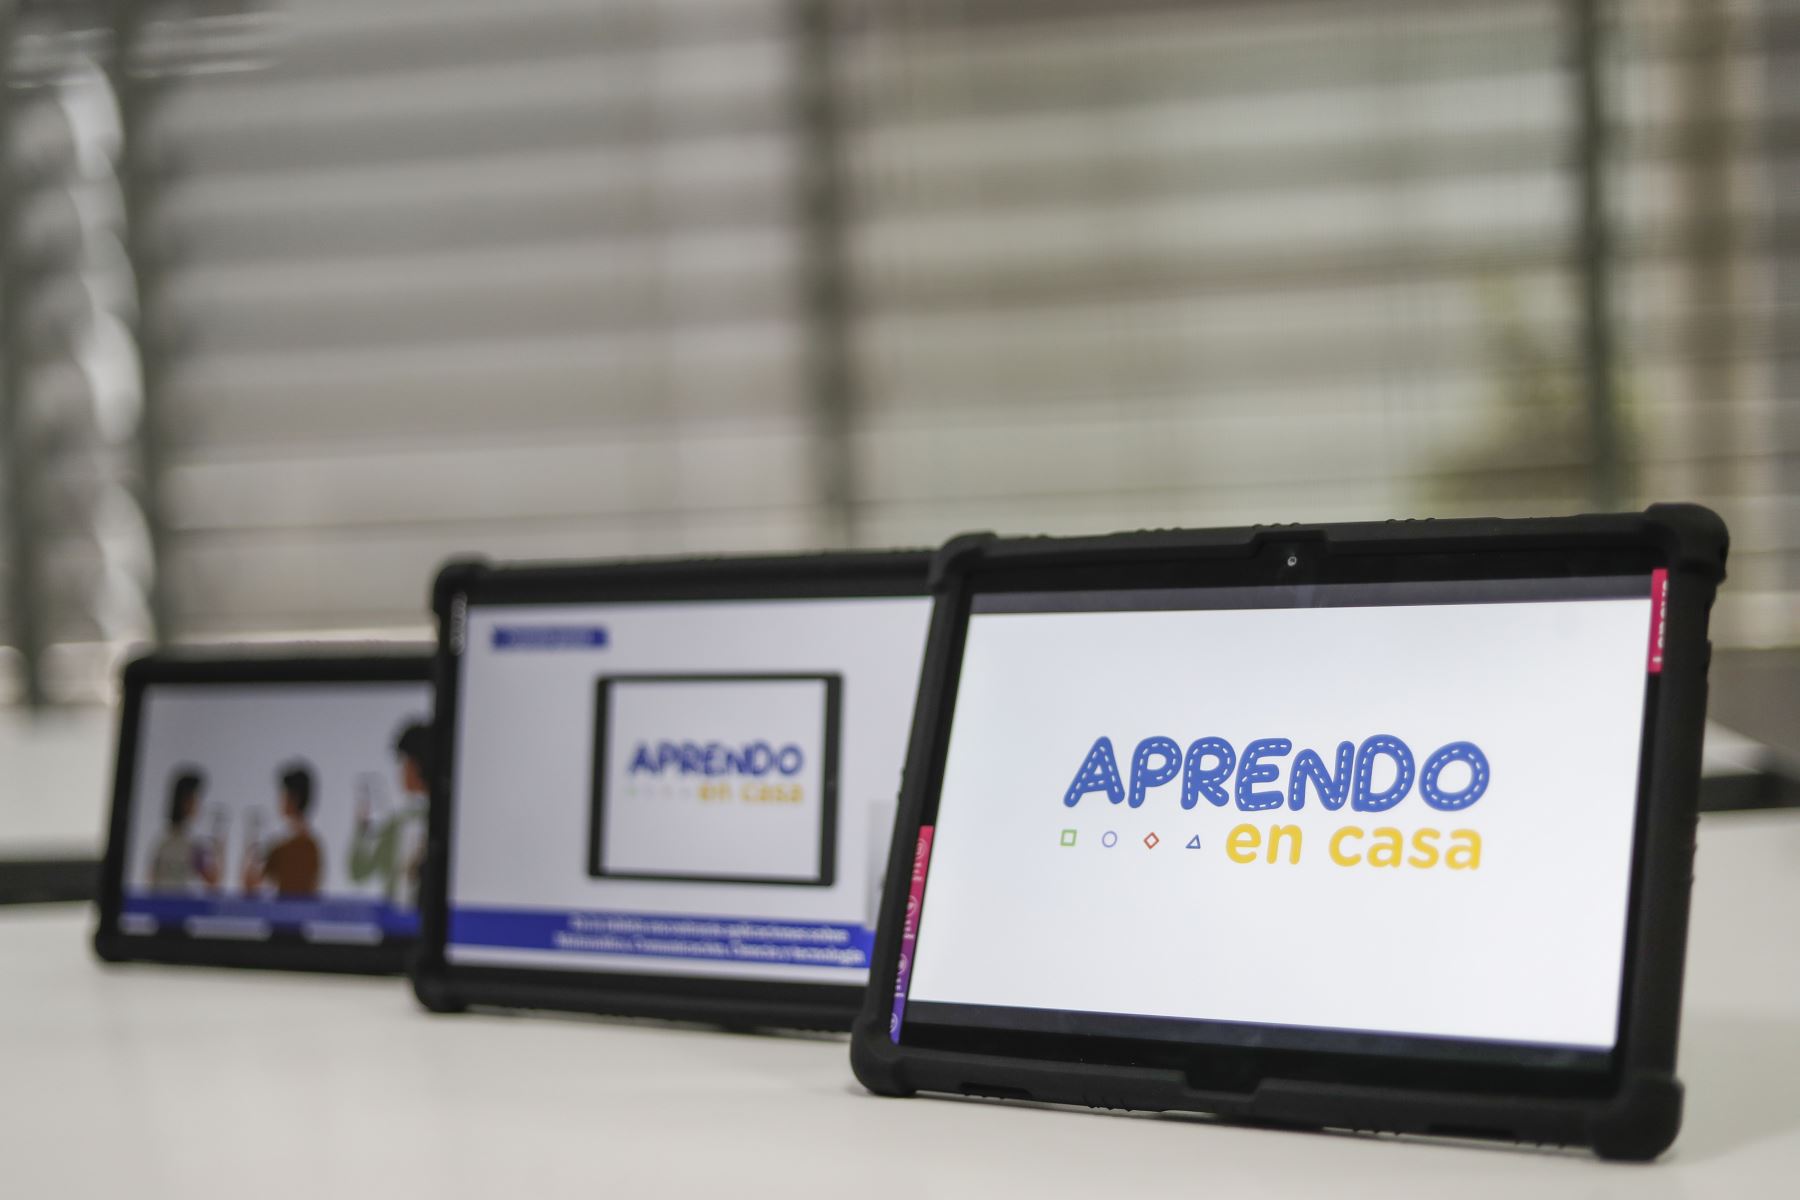 The Ministry of Education presented tablets that will be distributed to schoolchildren starting October. Photo: ANDINA/Renato Pajuelo